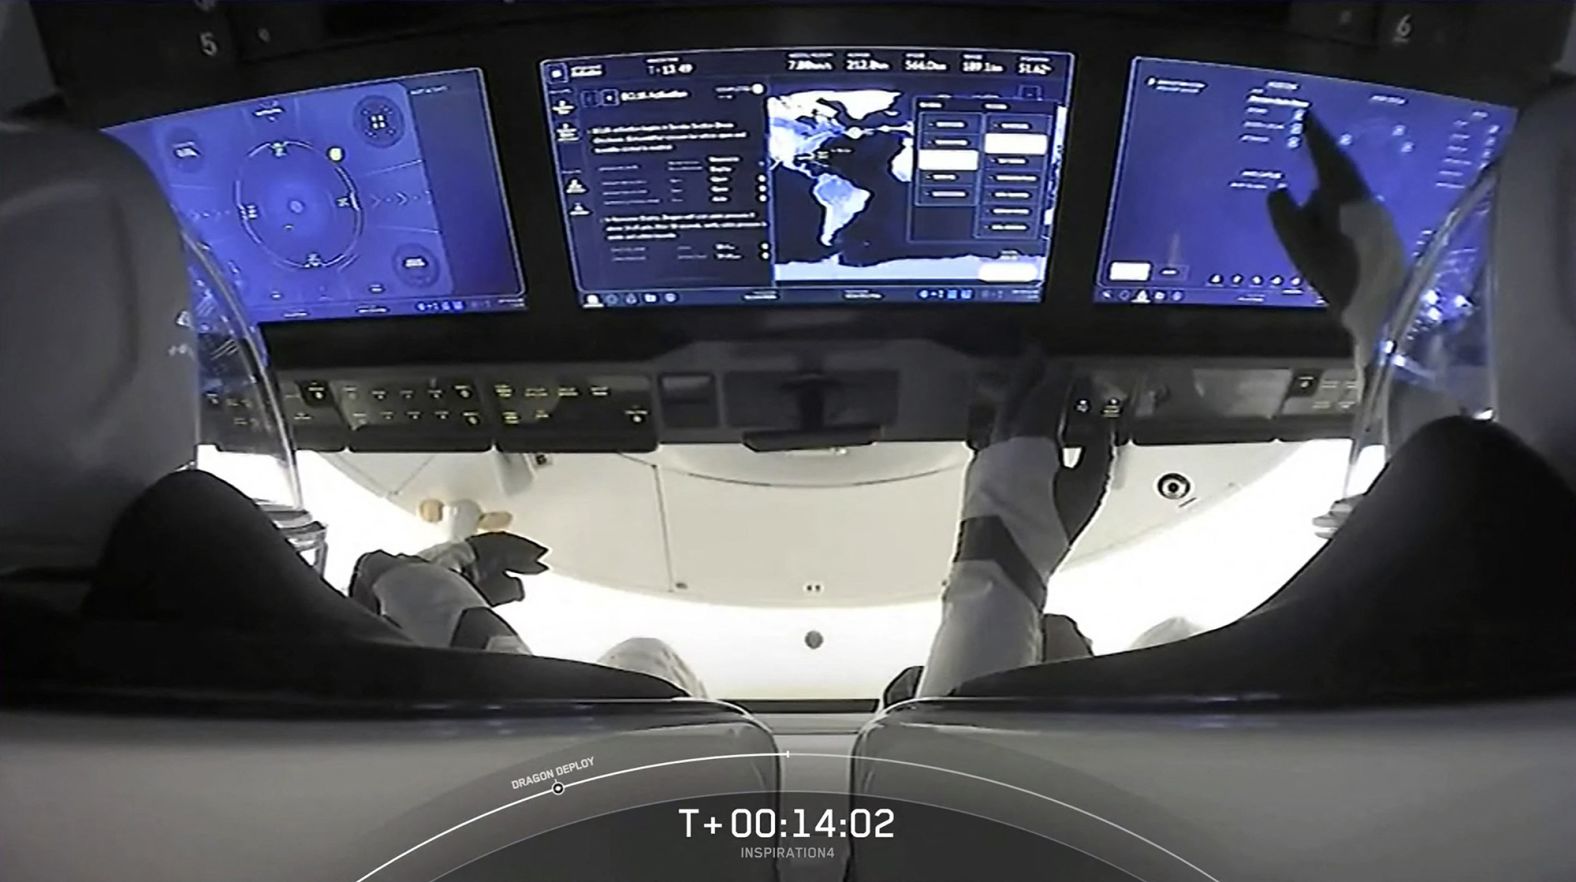 Proctor interacts with the dashboard on the Crew Dragon capsule.